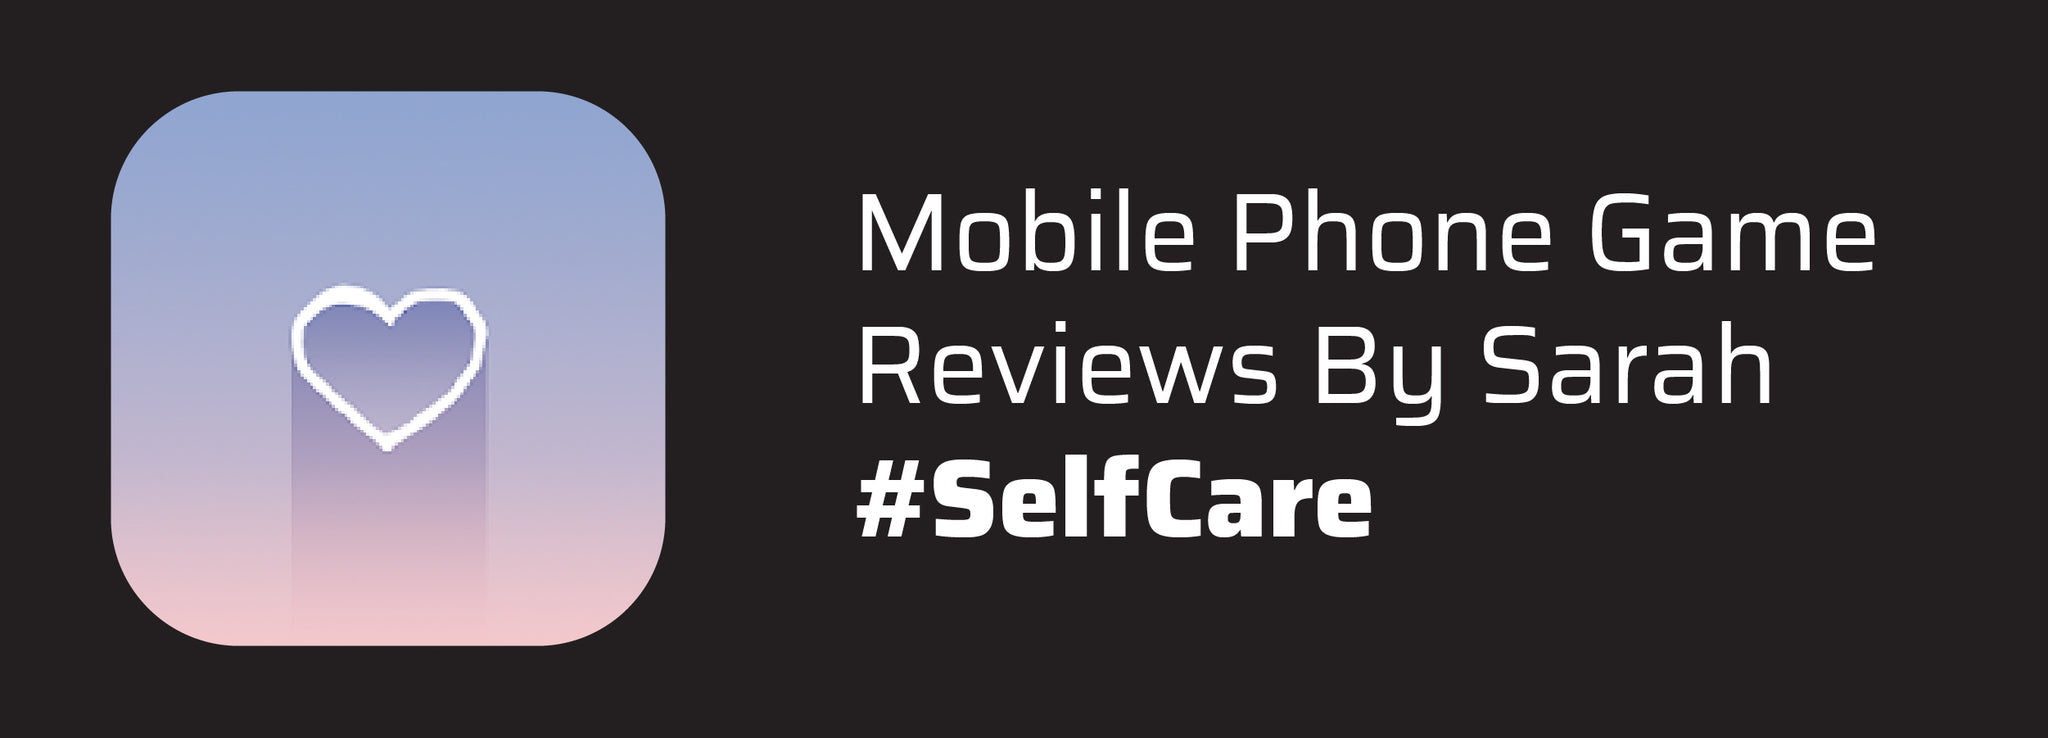 Mobile Phone Game Reviews By Sarah #SelfCare